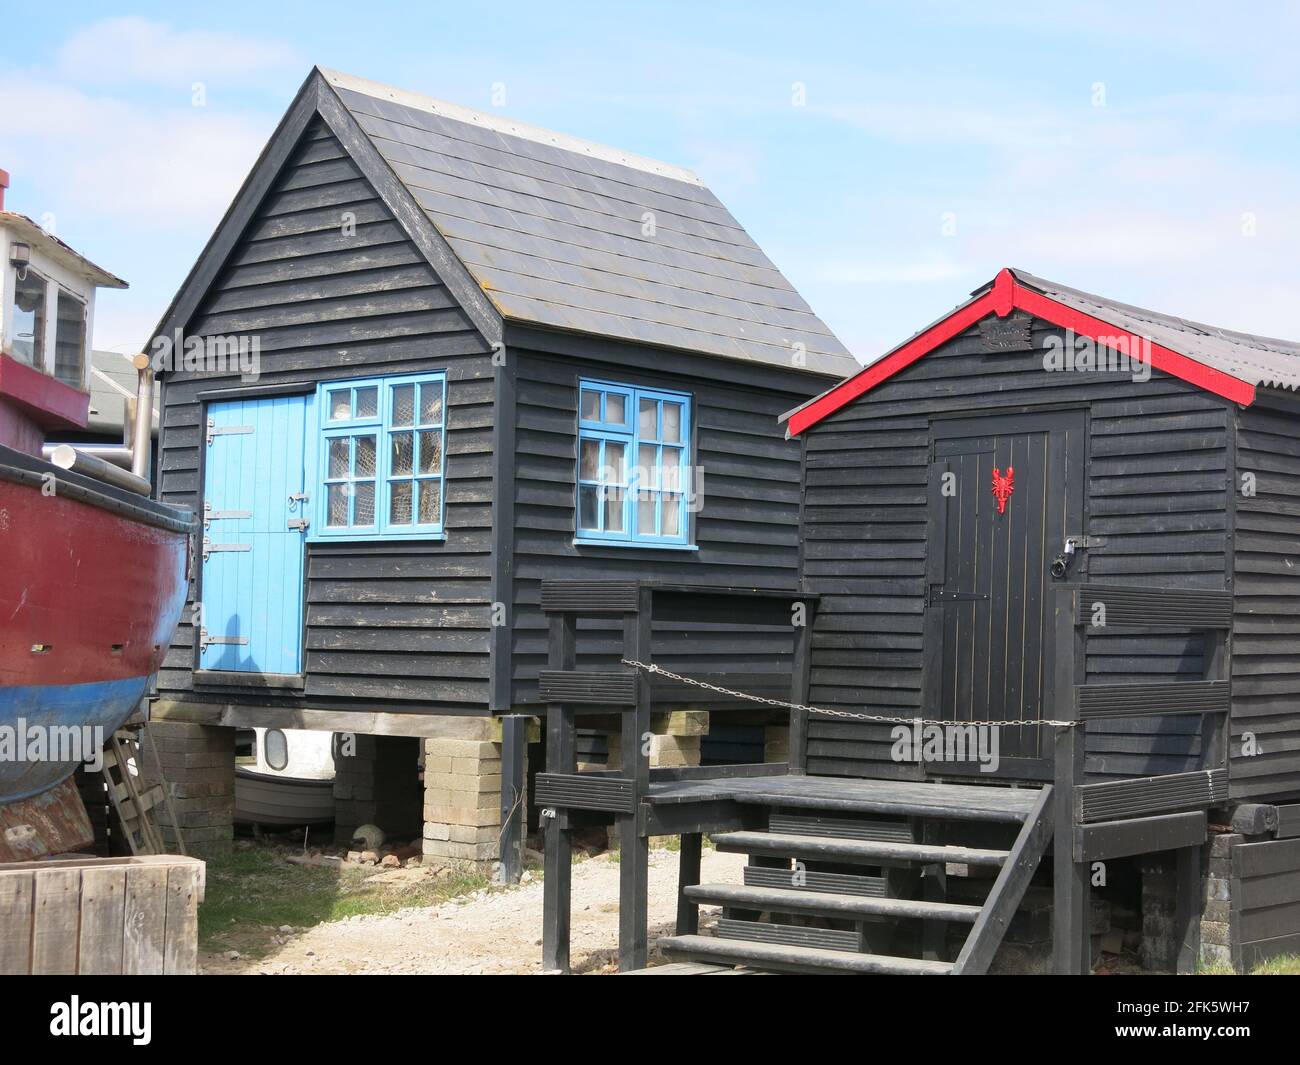 Southwold Harbour is a popular tourist destination with the attractive black weatherboard fishermen's huts & fishing heritage along the River Blyth. Stock Photo